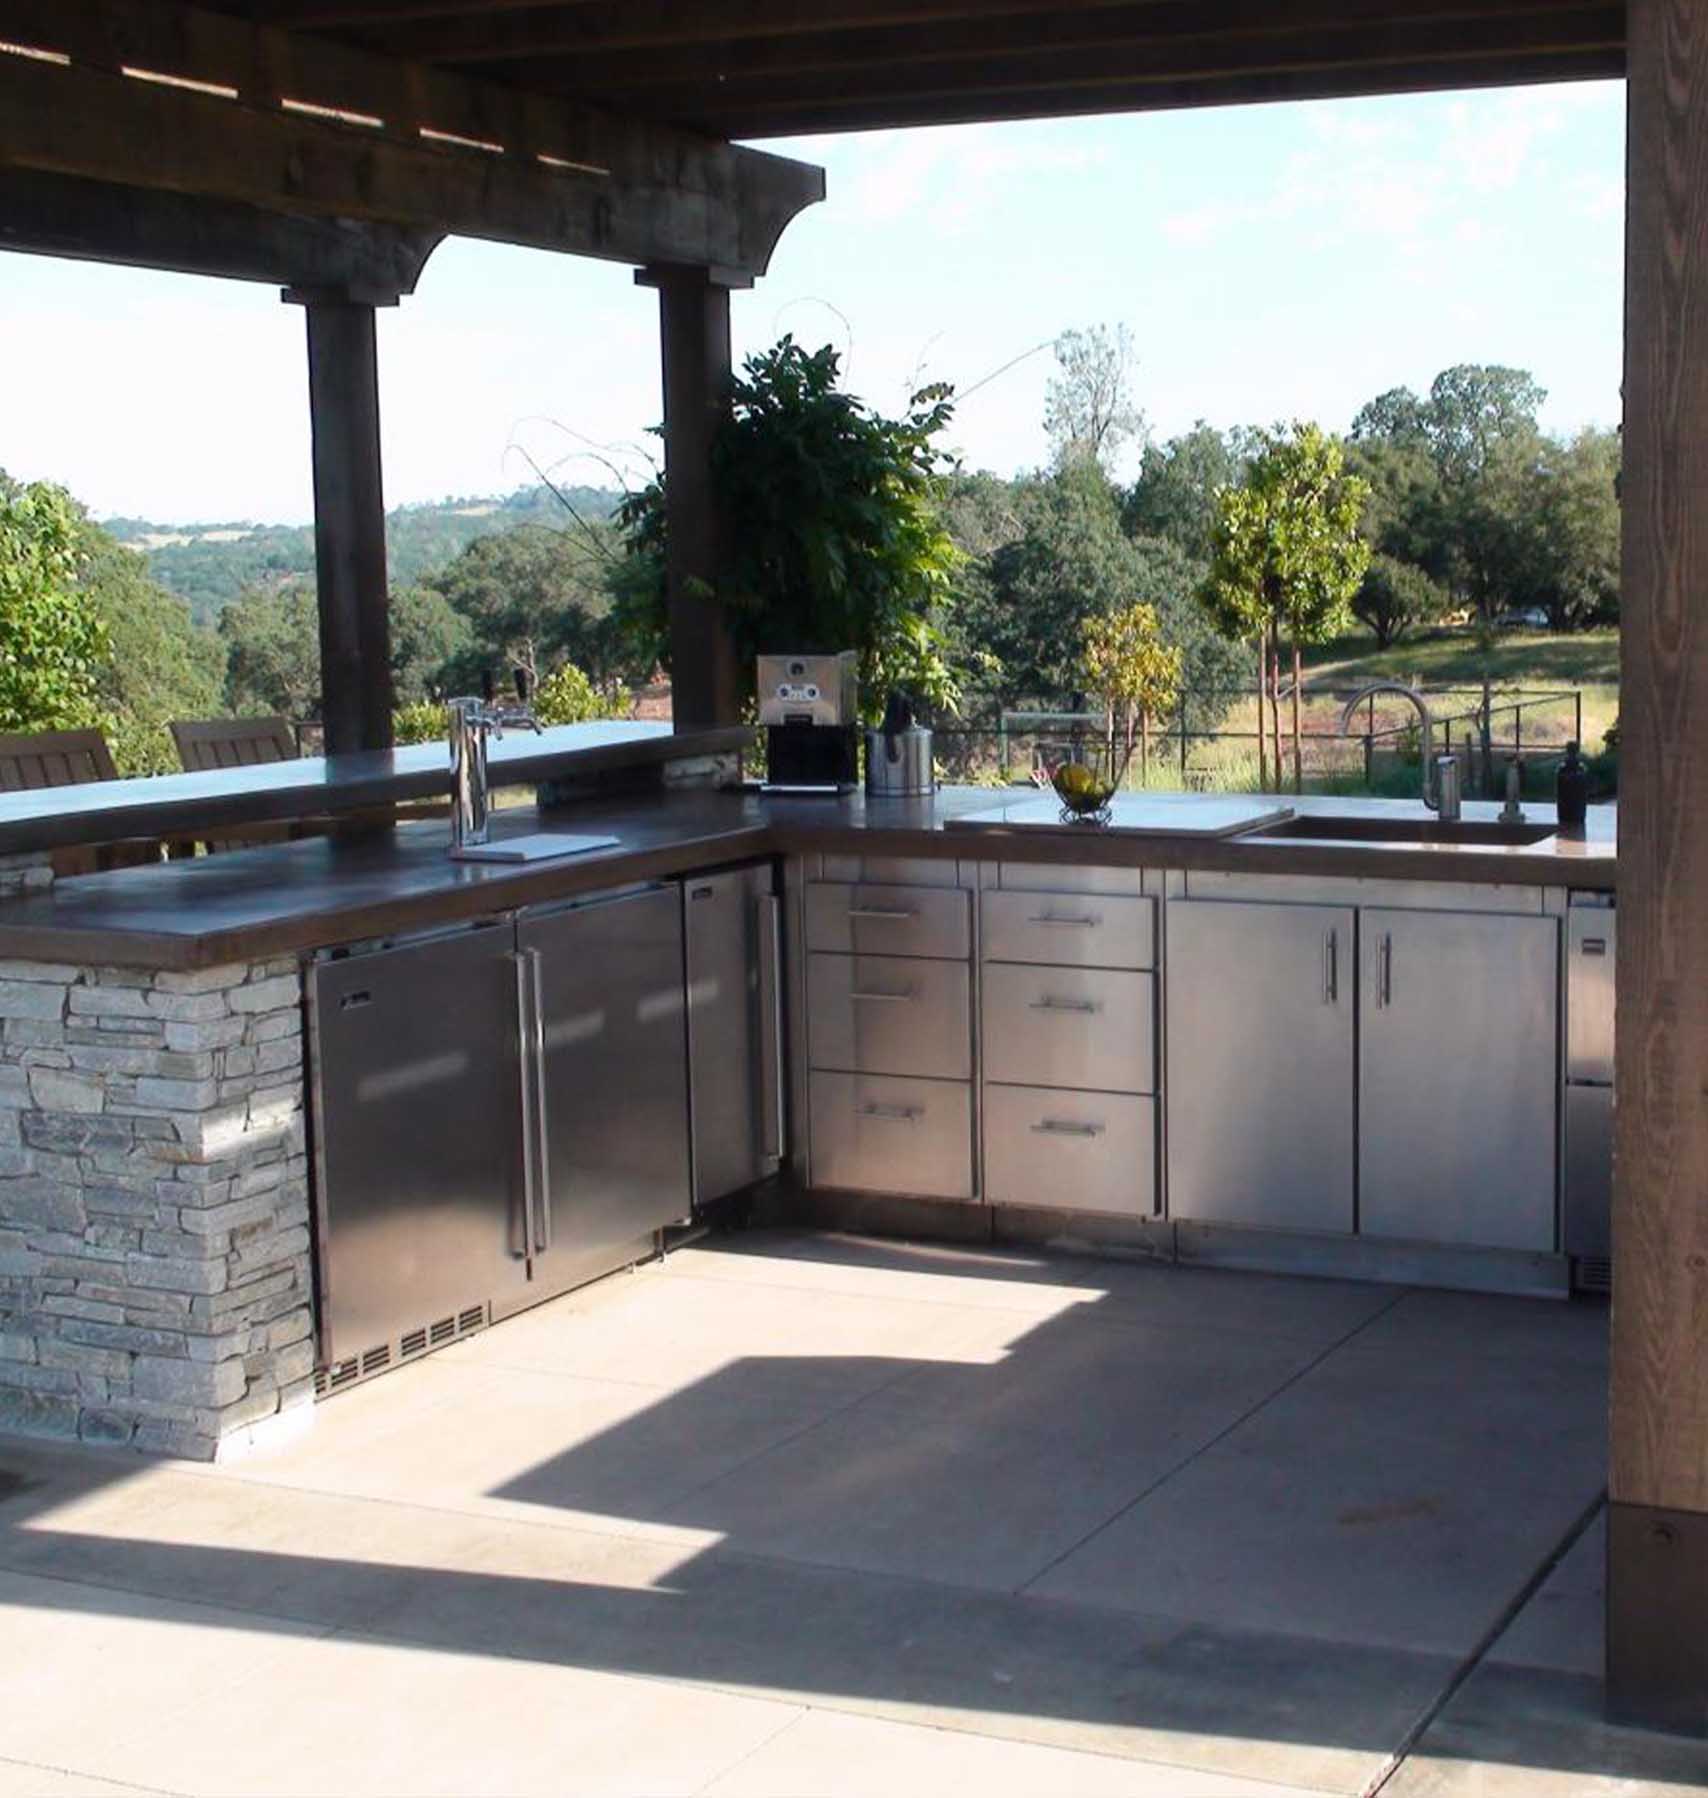 Build an Outdoor Kitchen to Liven Up House Parties